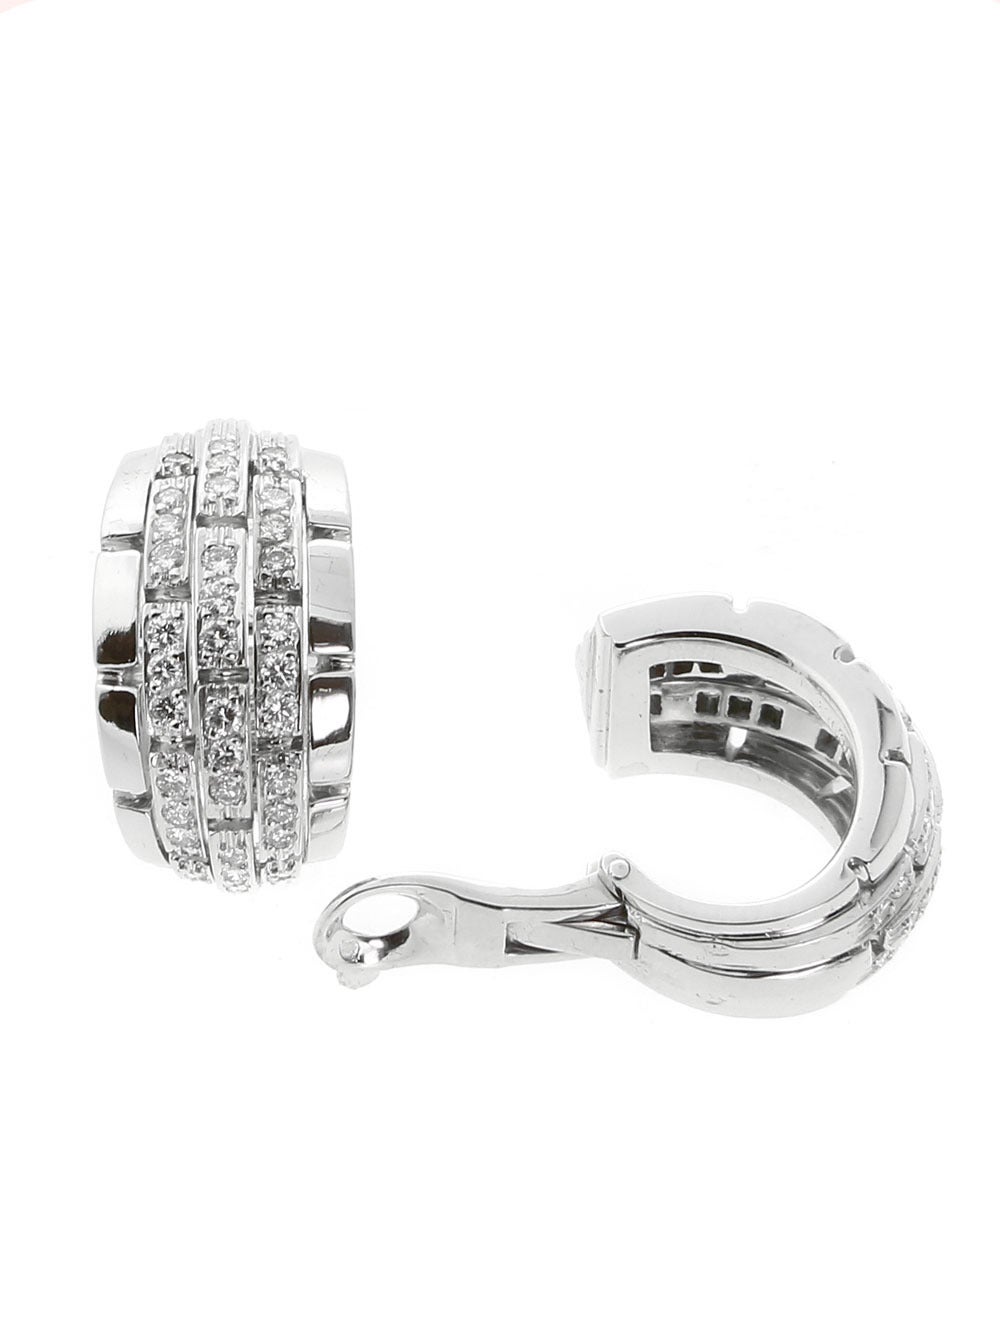 Round Cut Cartier Panthere Diamond White Gold Earrings For Sale